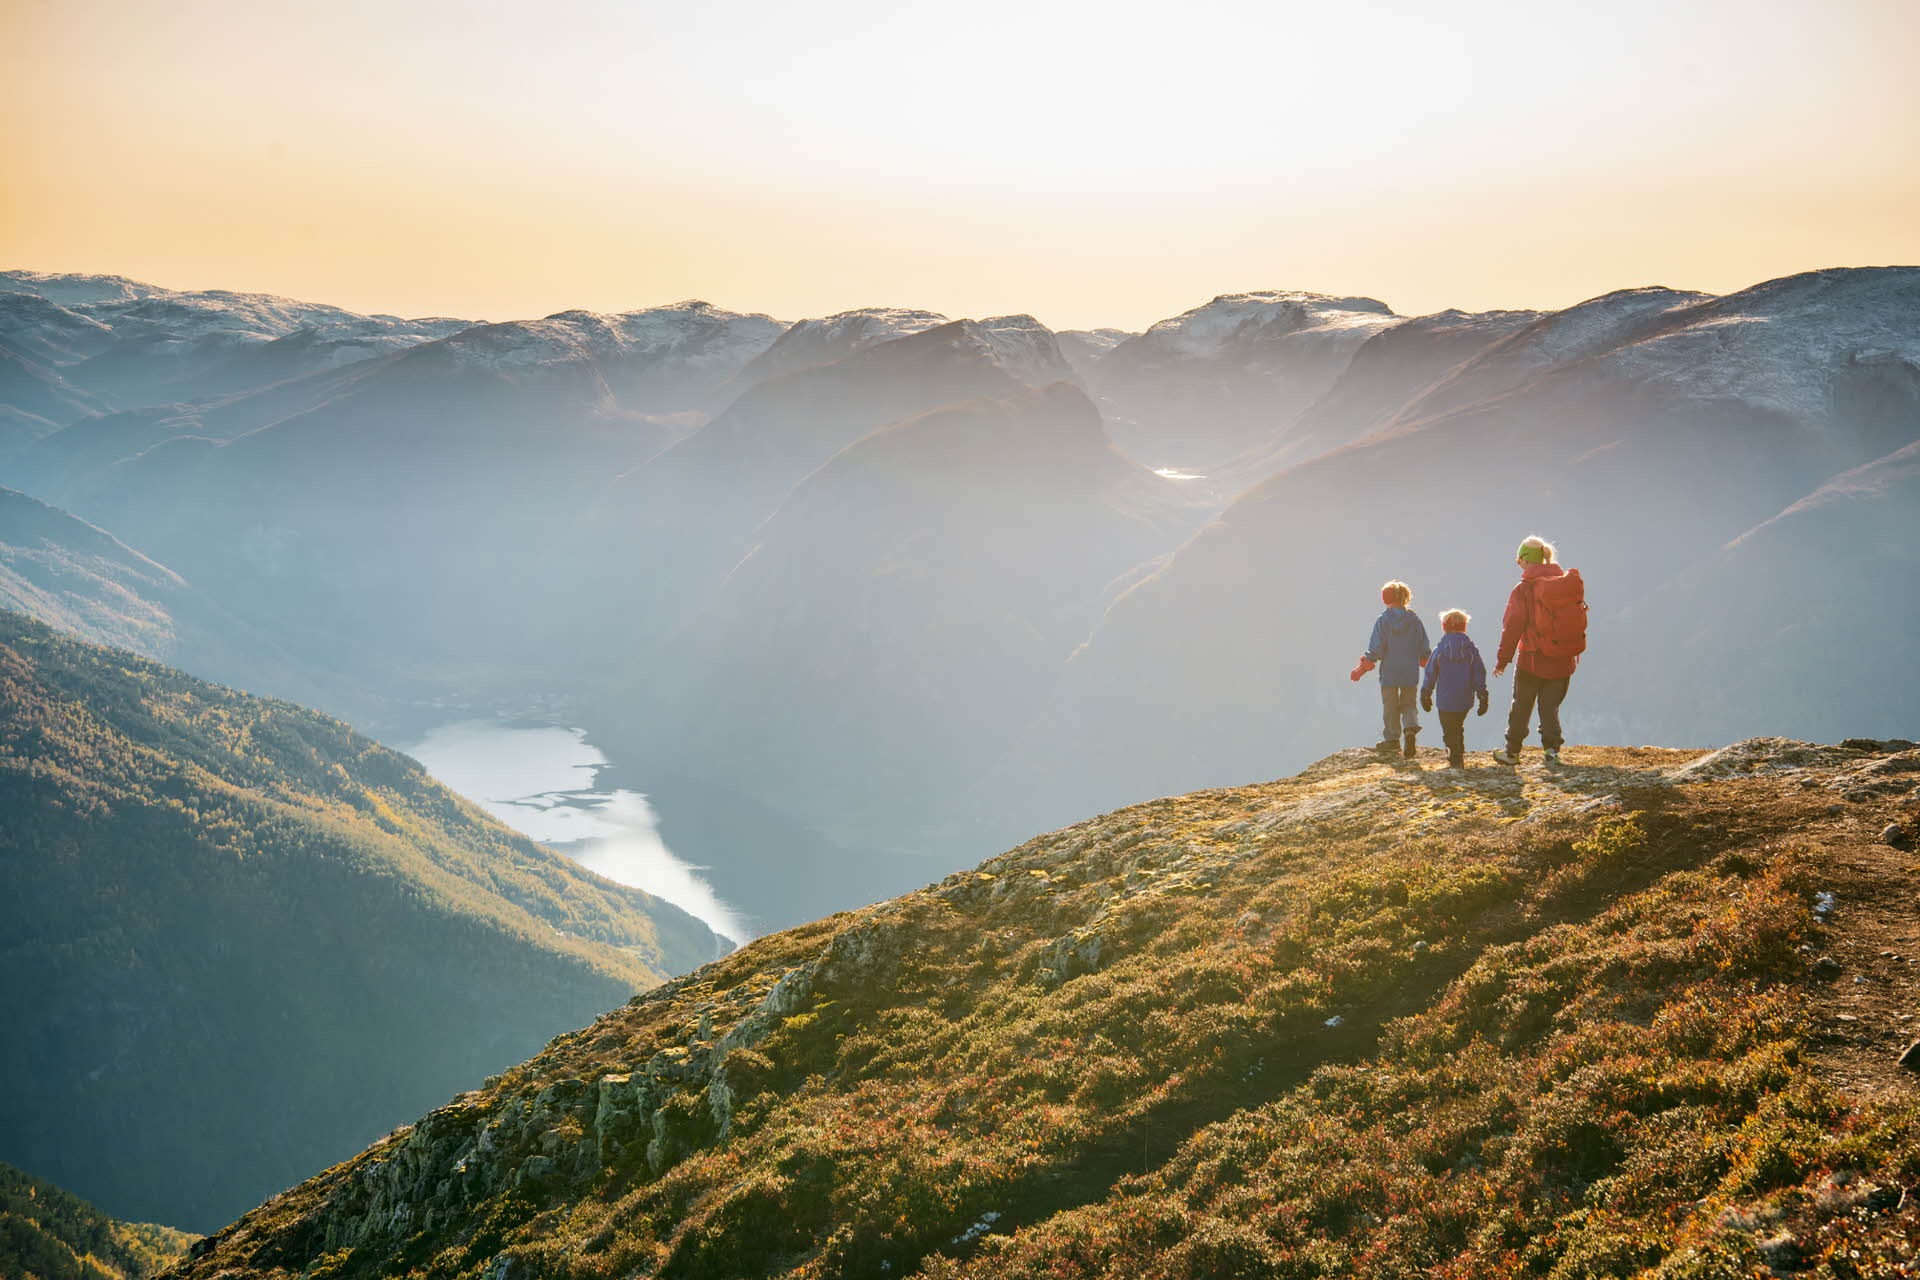 A woman and two kids on mt. Prest overlooking the Aurlandsfjord, Flåm and the mountains at sunset